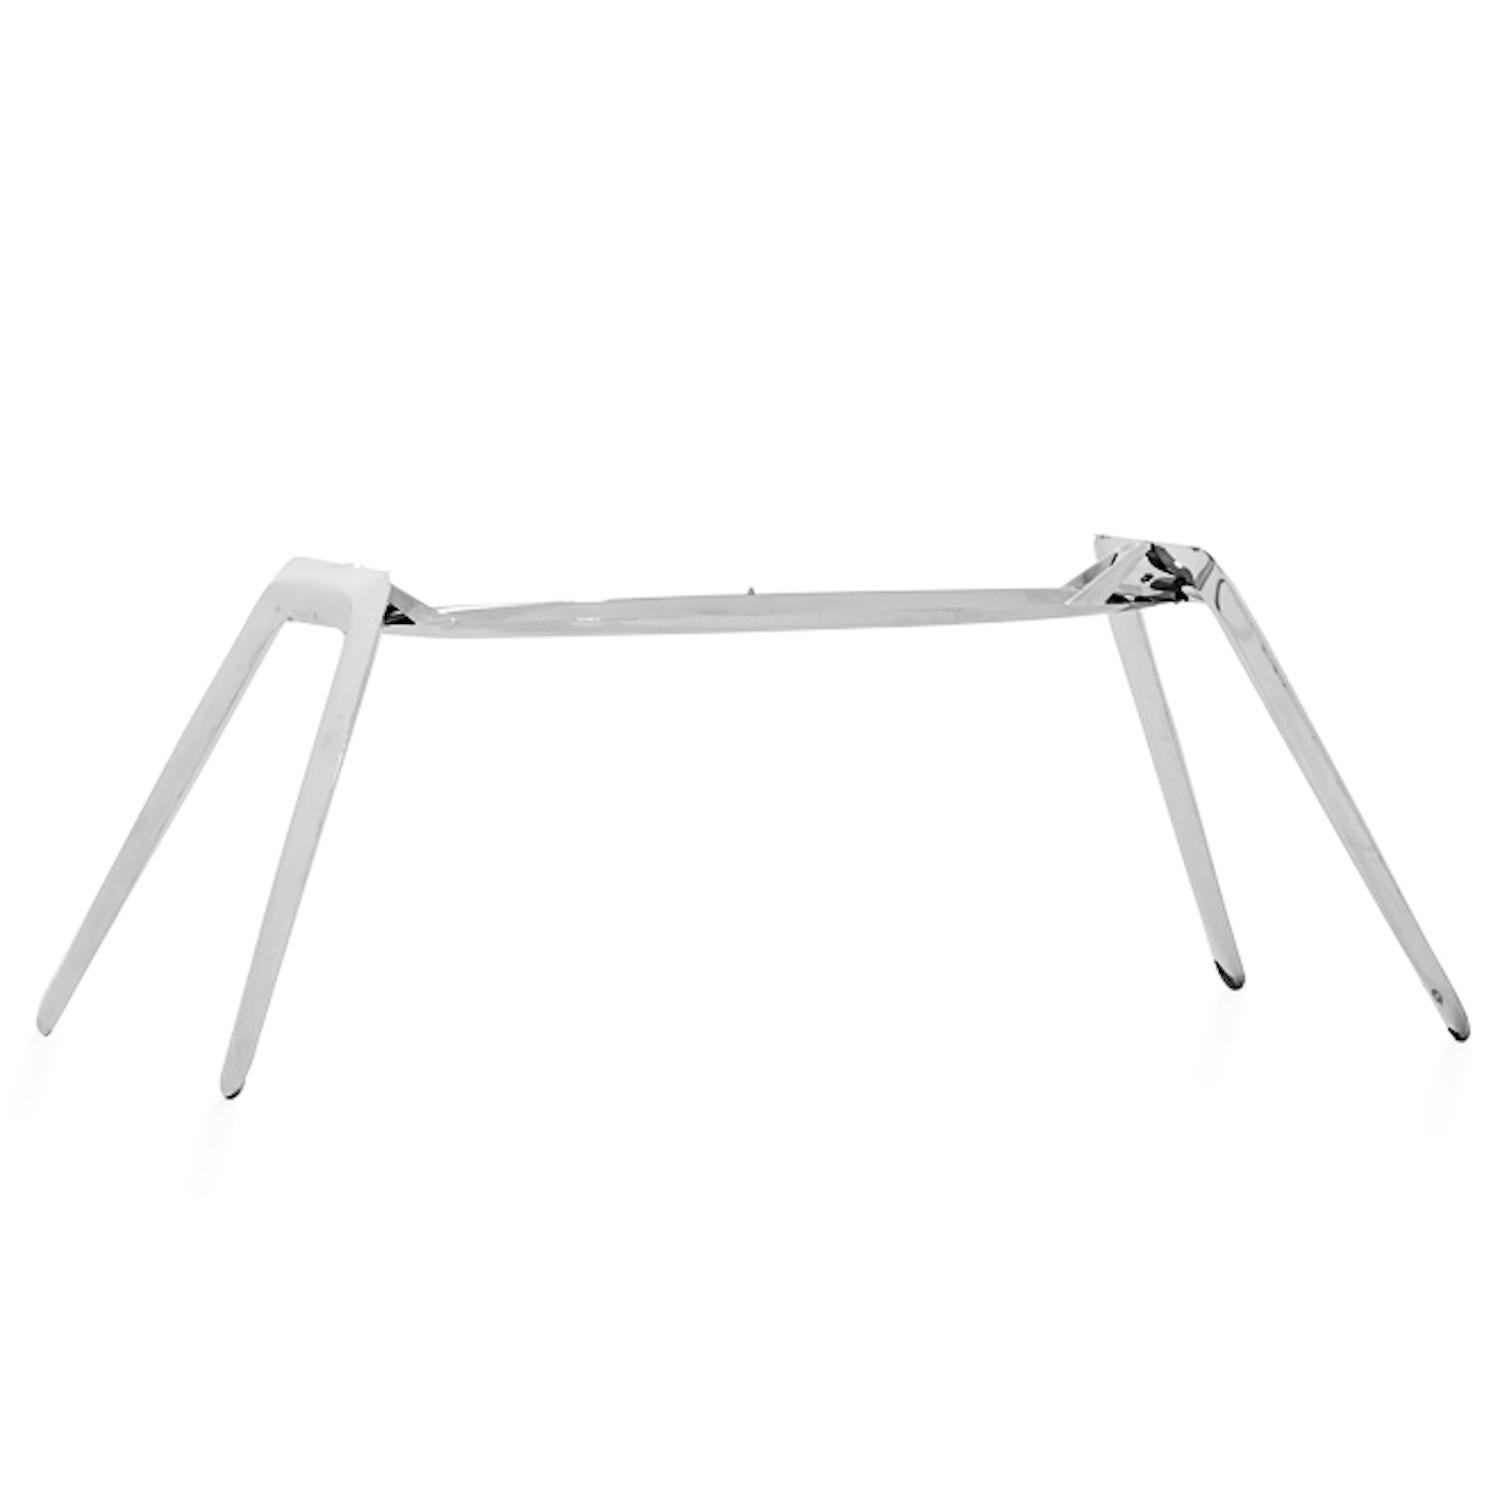 Nogi is a unique construction for tables. It can be produced in different shapes and sizes in different kinds of metals.

Nogi table is available in stainless steel and carbon steel with the following finish options;

Stainless